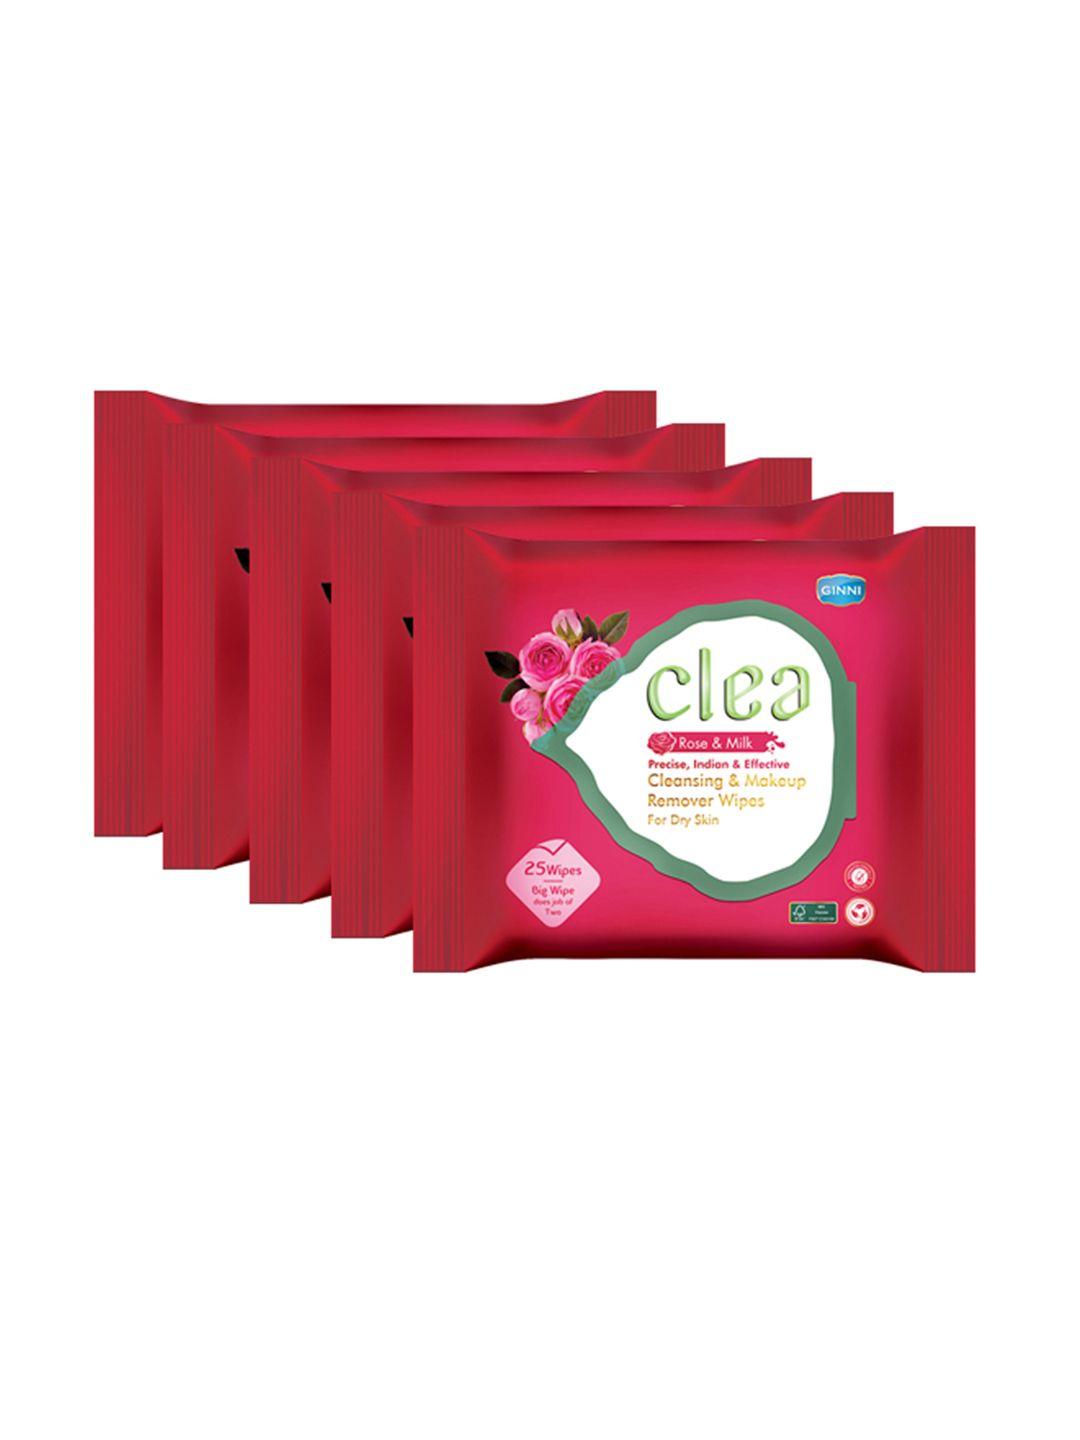 clea set of 5 rose & milk cleansing & makeup remover wet wipes - 25 pulls each